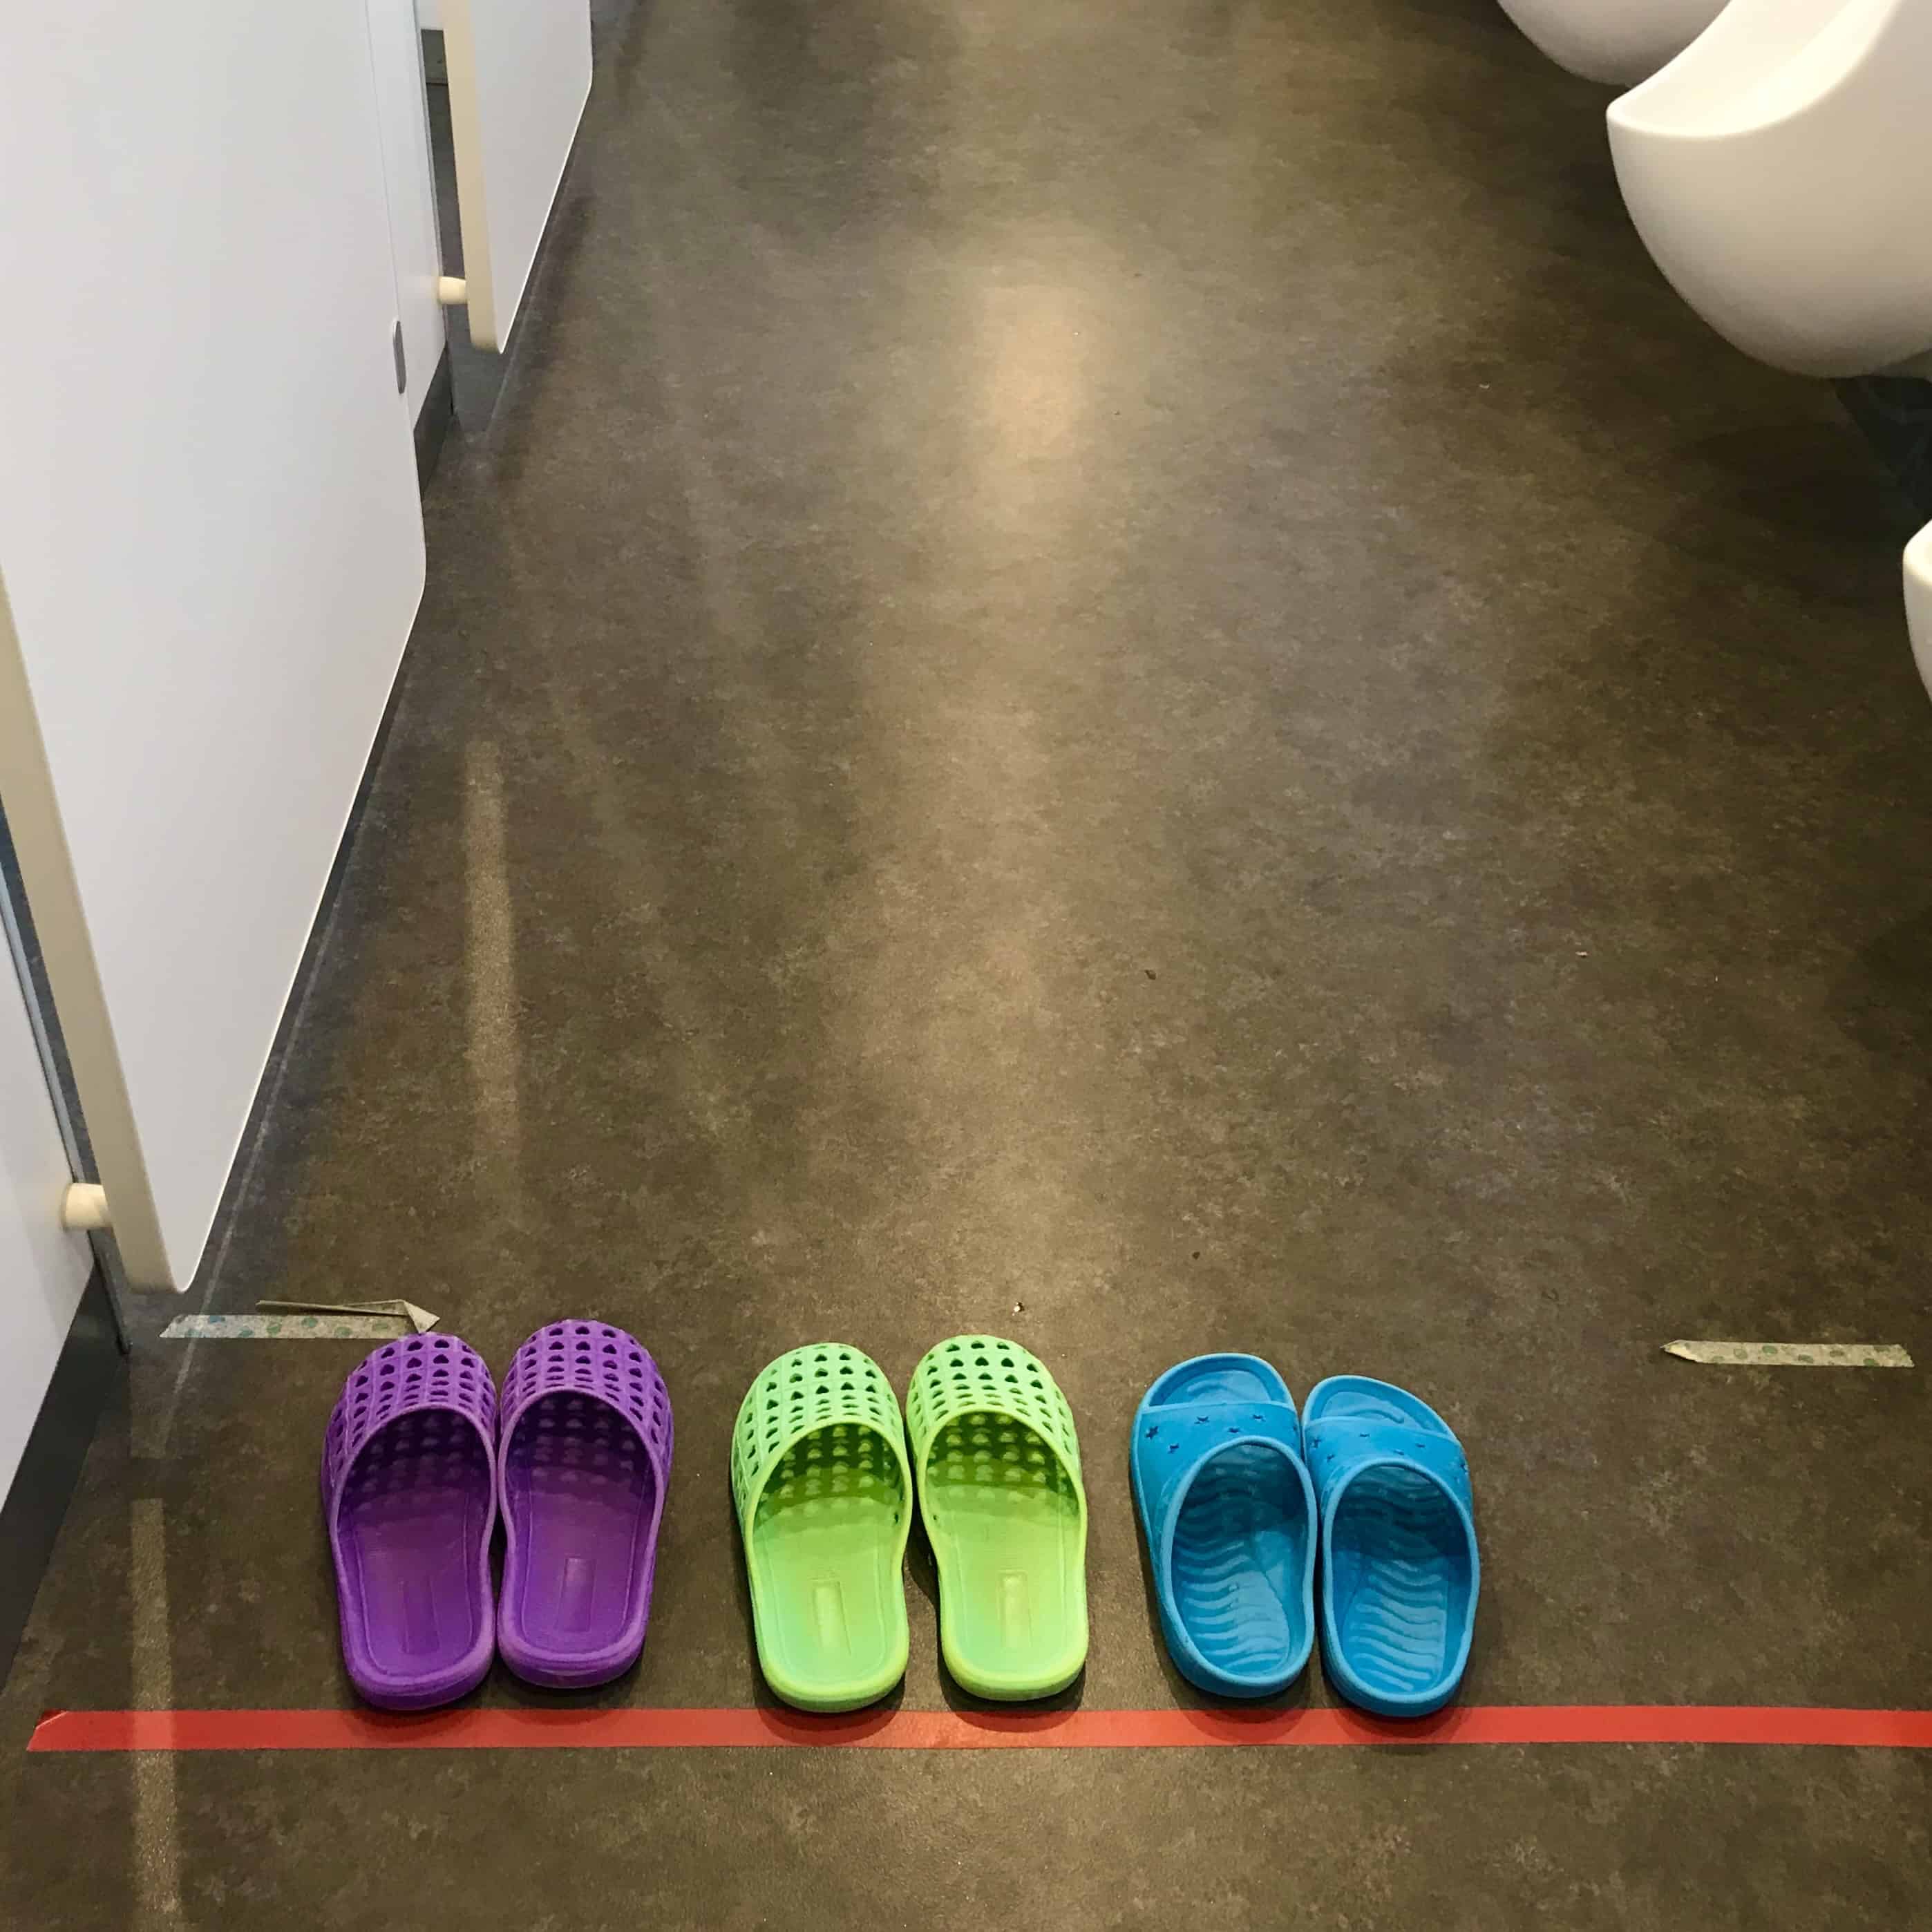 Shoe etiquette in Japan means changing into toilet slippers in the restroom